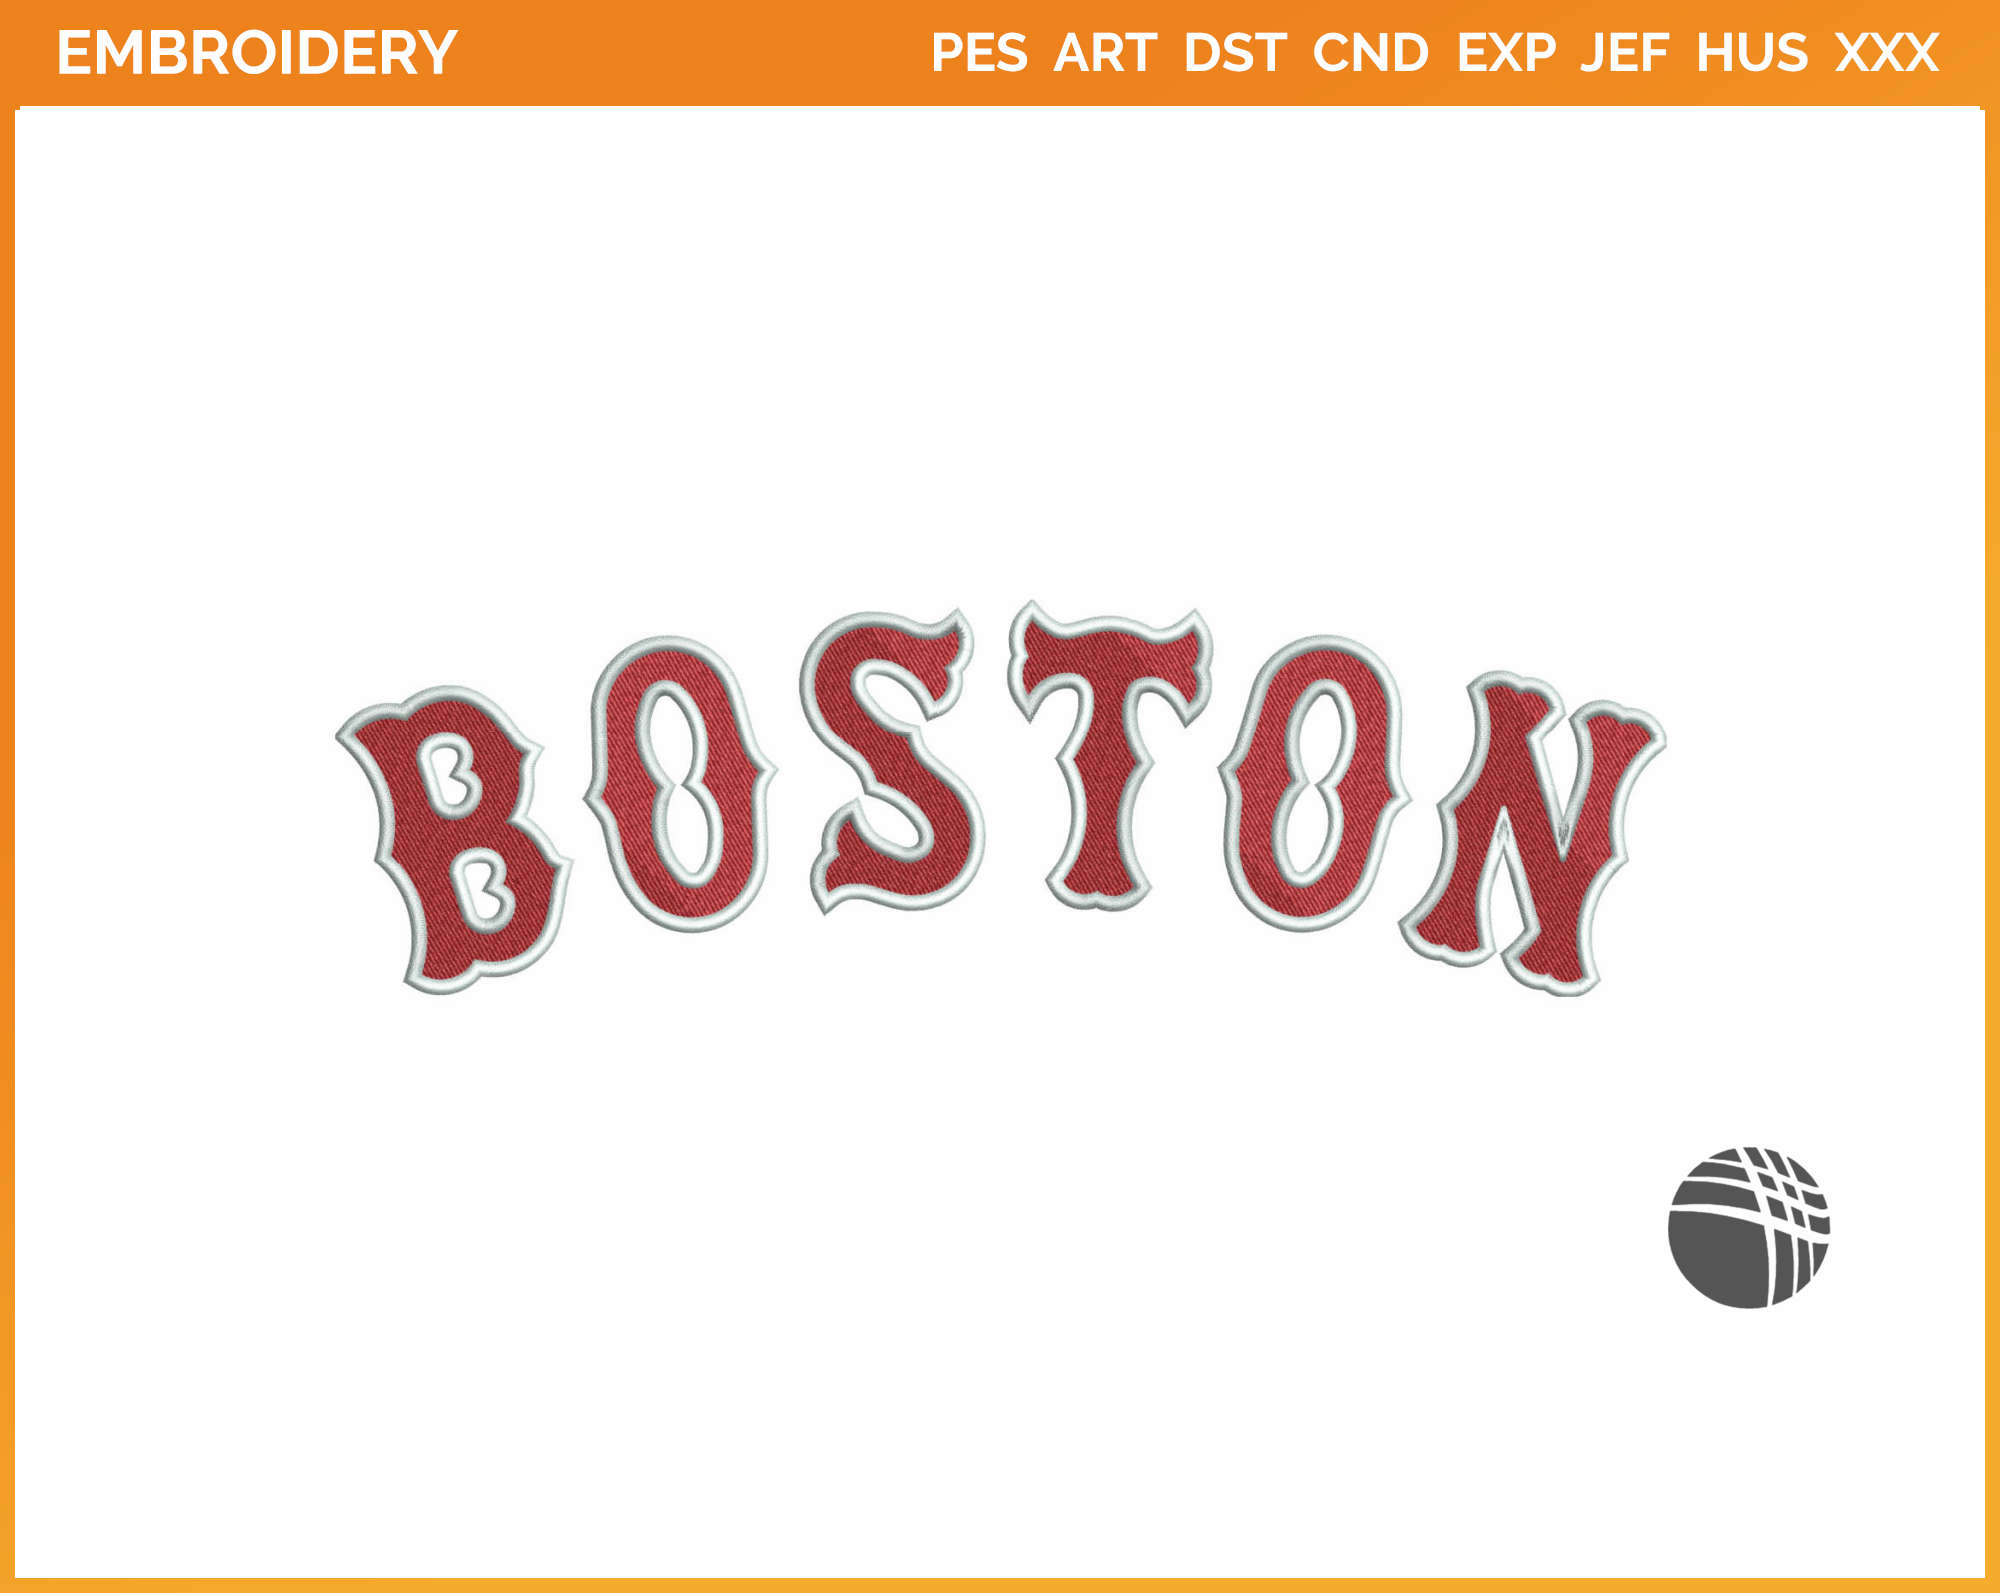 Boston Red Sox - Baseball Sports Vector SVG Logo in 5 formats - SPLN000470  • Sports Logos - Embroidery & Vector for NFL, NBA, NHL, MLB, MiLB, and more!